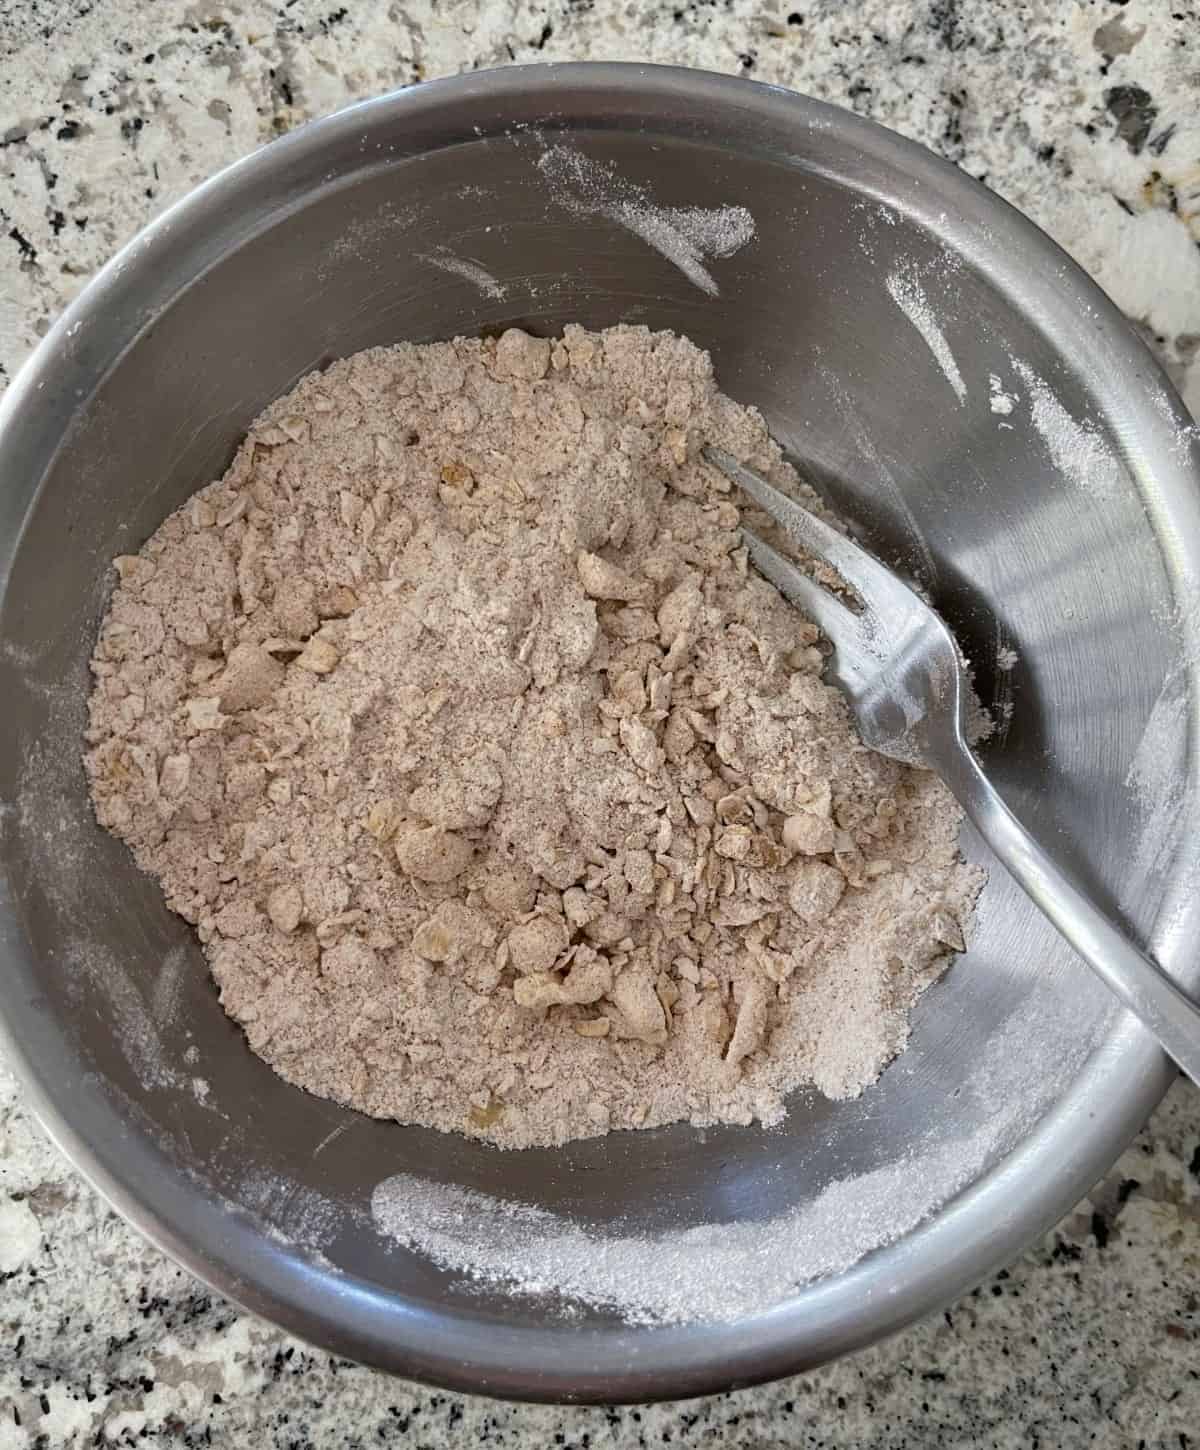 Mixing Truvia sweetener, flour, quick oats, cinnamon and cold butter in a mixing bowl to create a crumble topping.